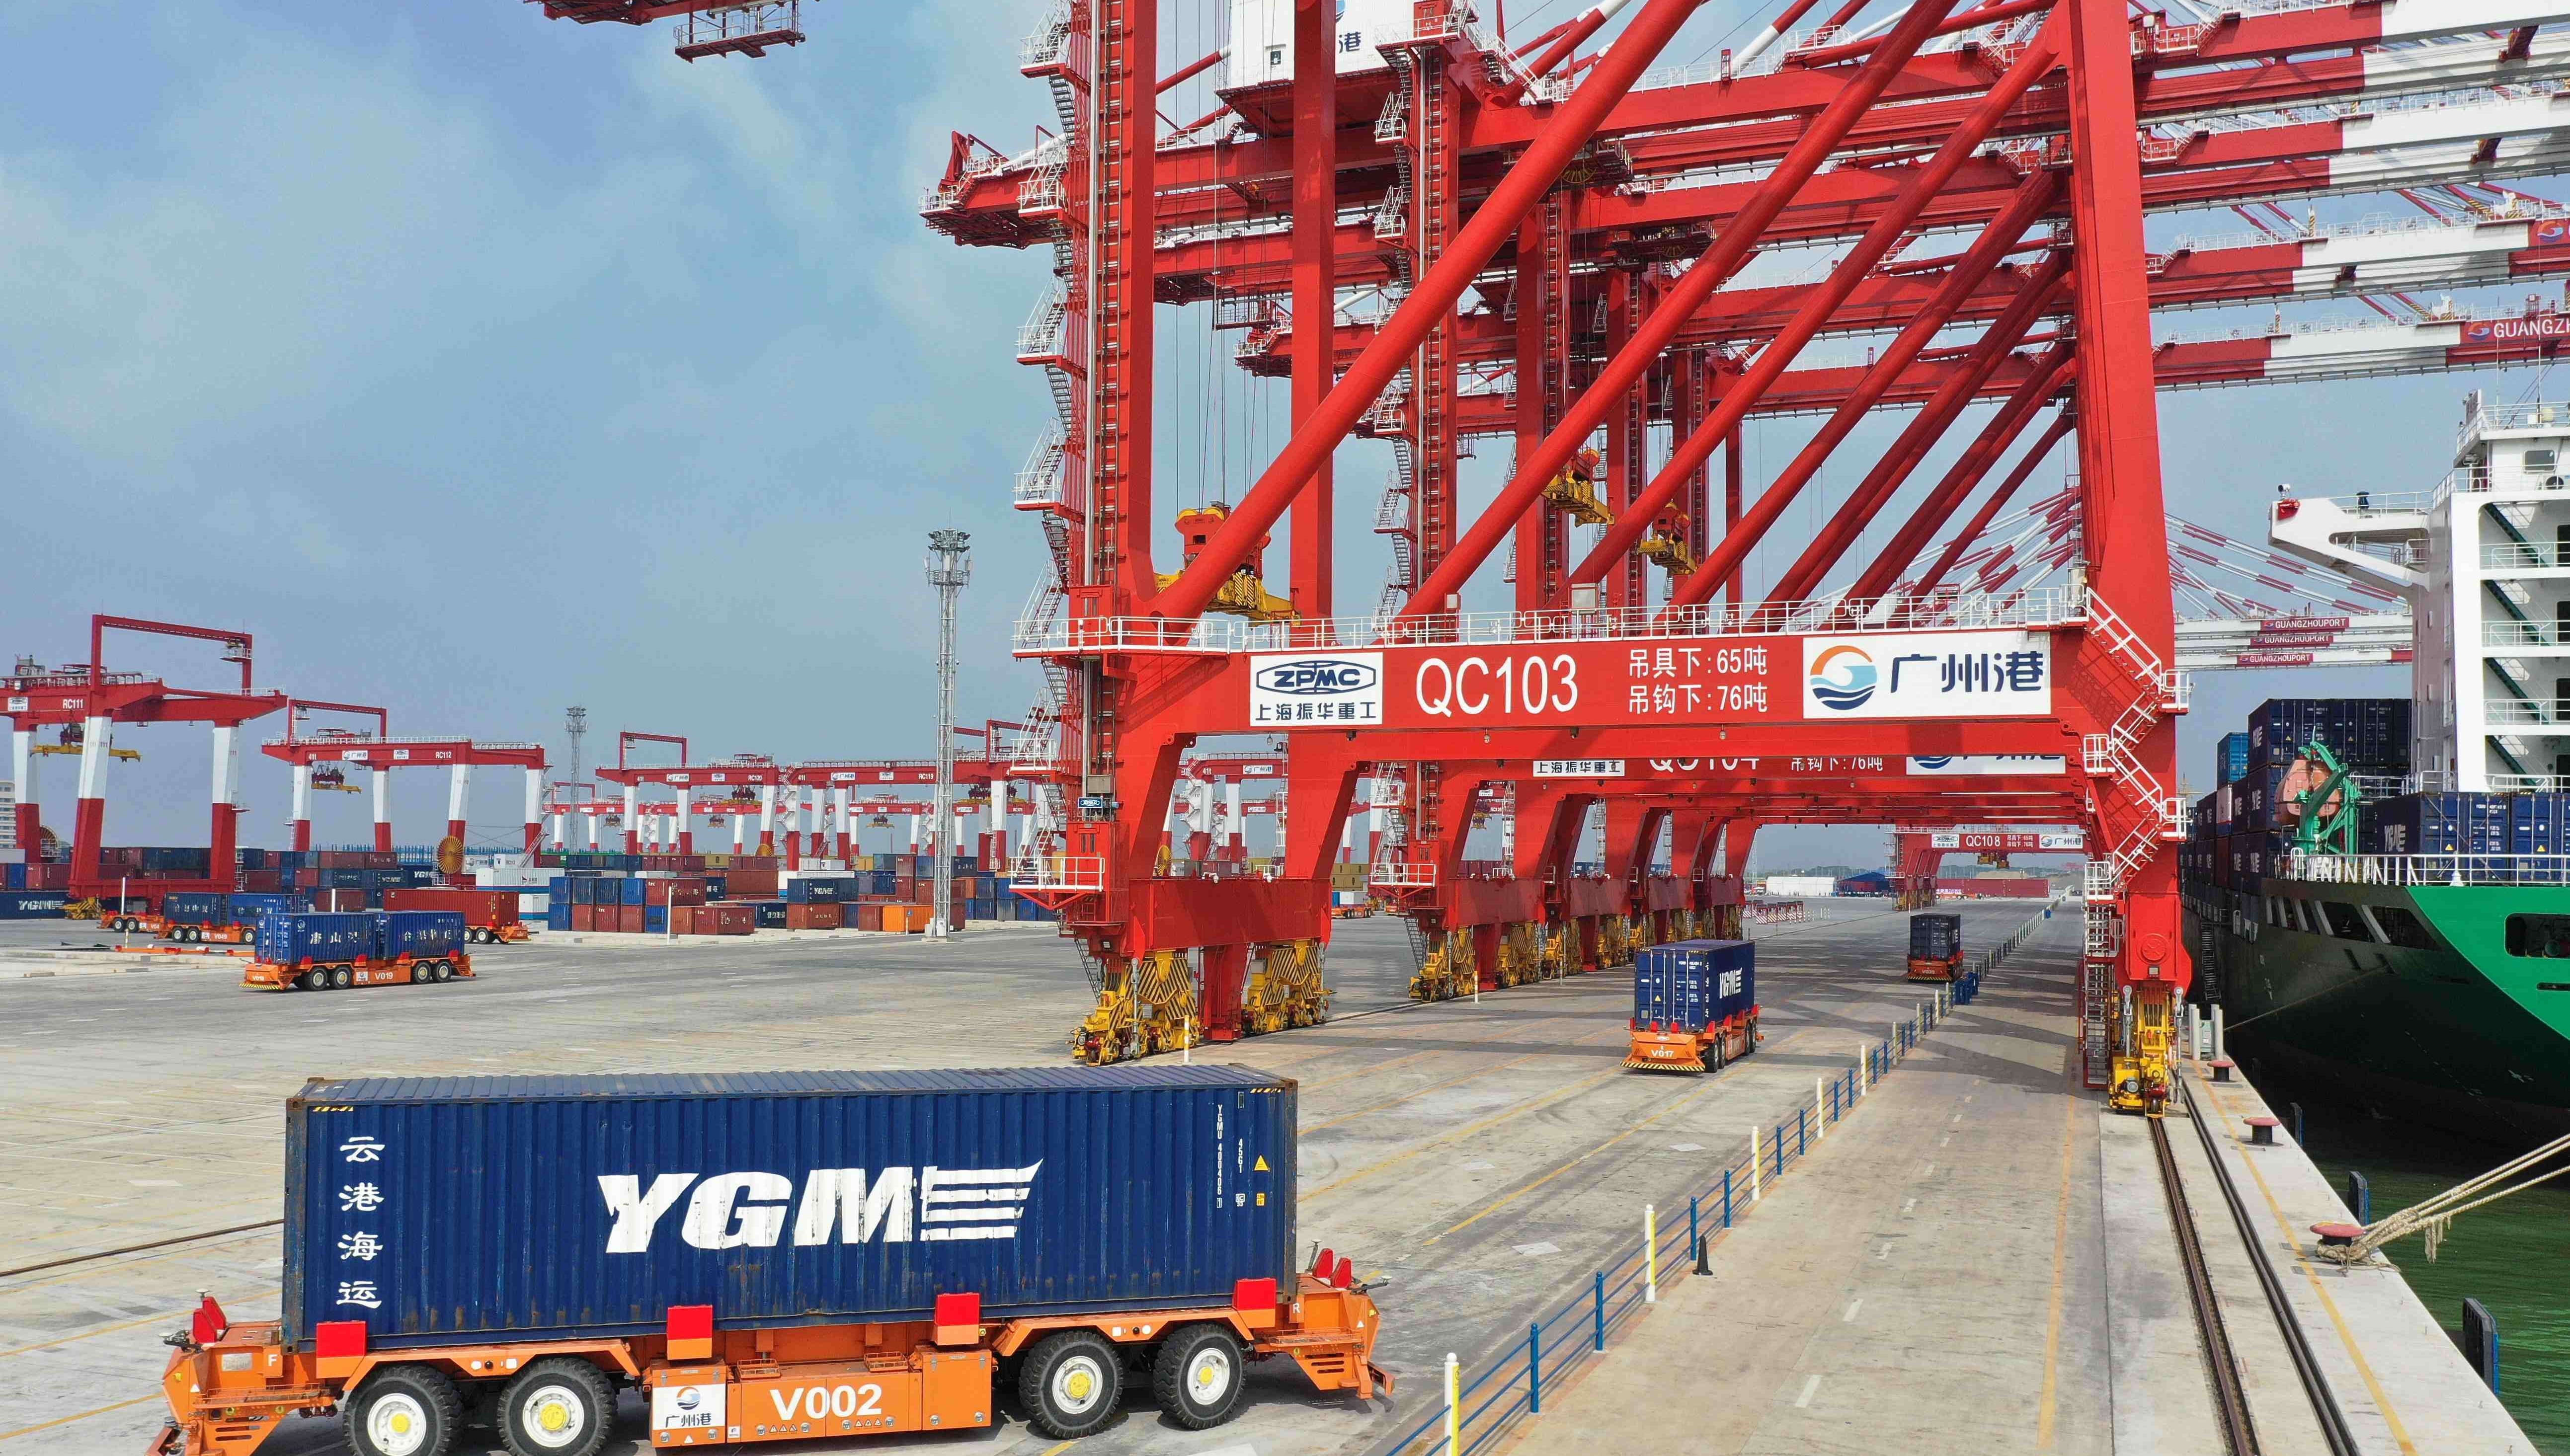 Automation brings higher efficiency, safety to terminal in south China